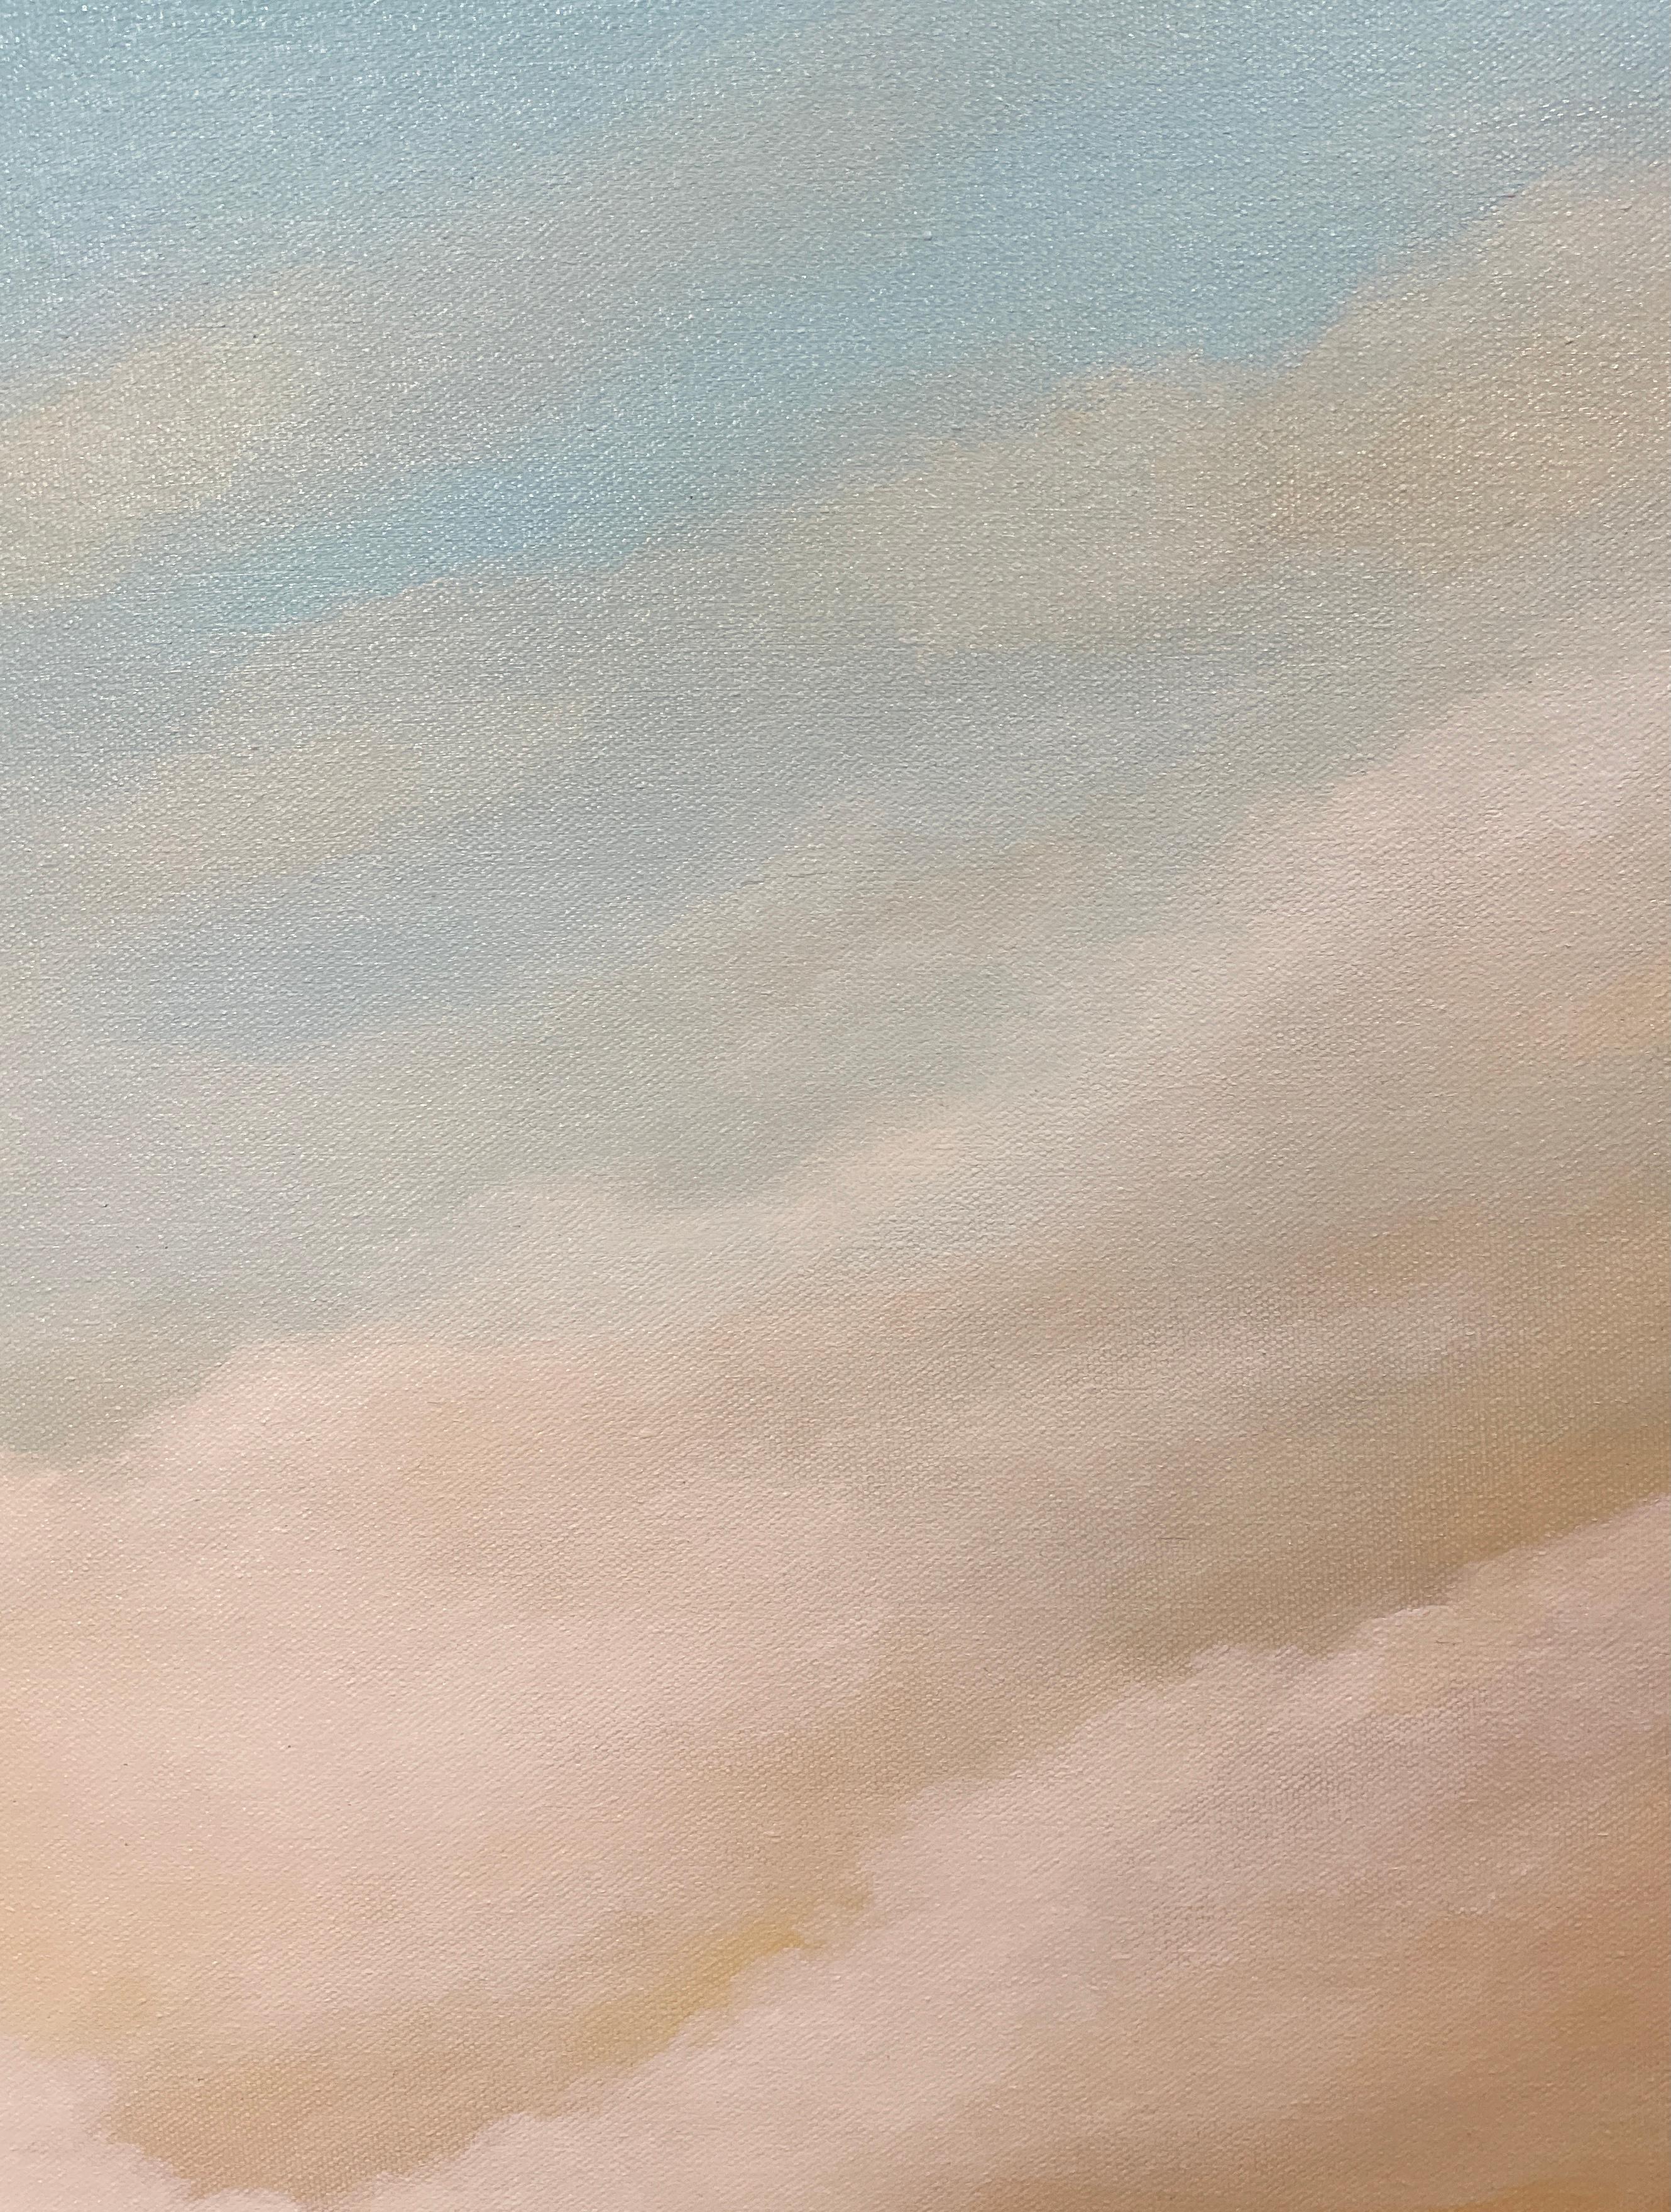 oil painting clouds